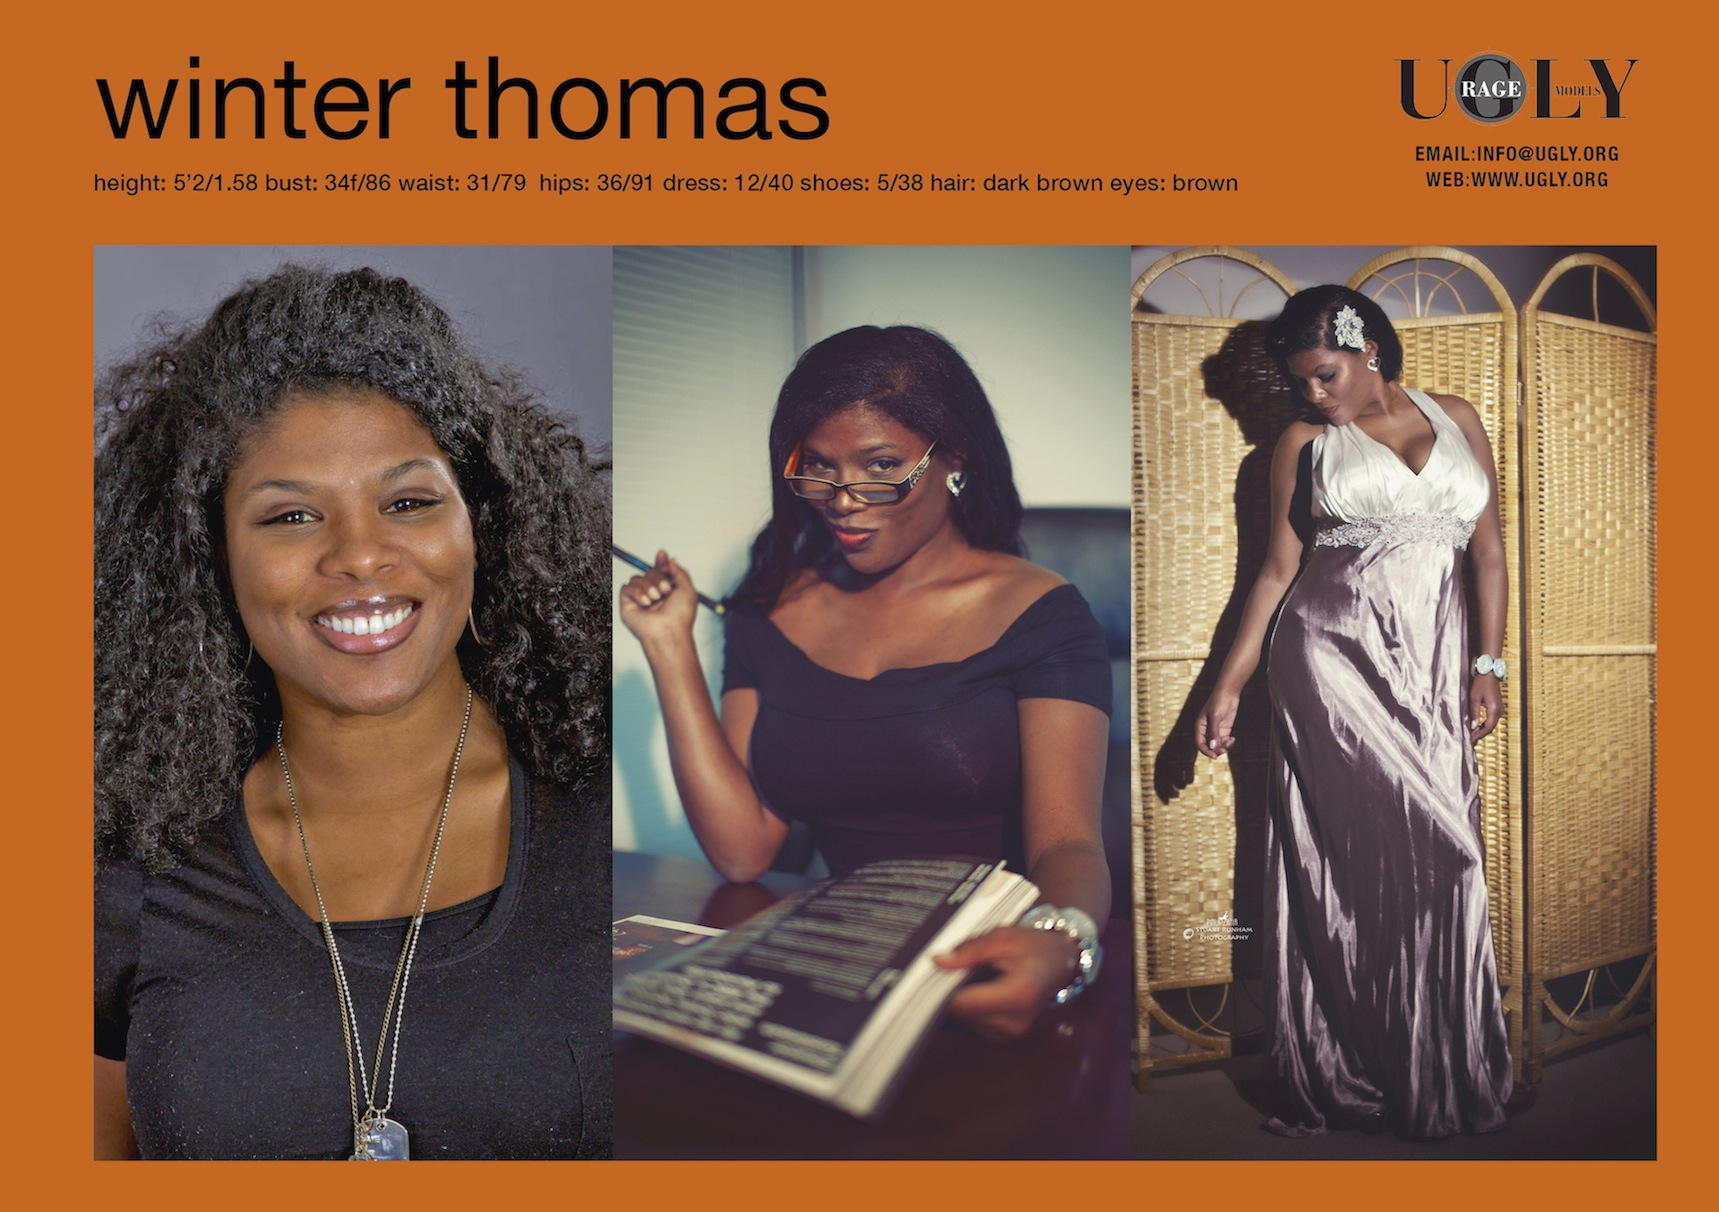 http://www.ugly.org/UGLY-MODELS/images/girls2/winter_thomas_2015_card.jpg